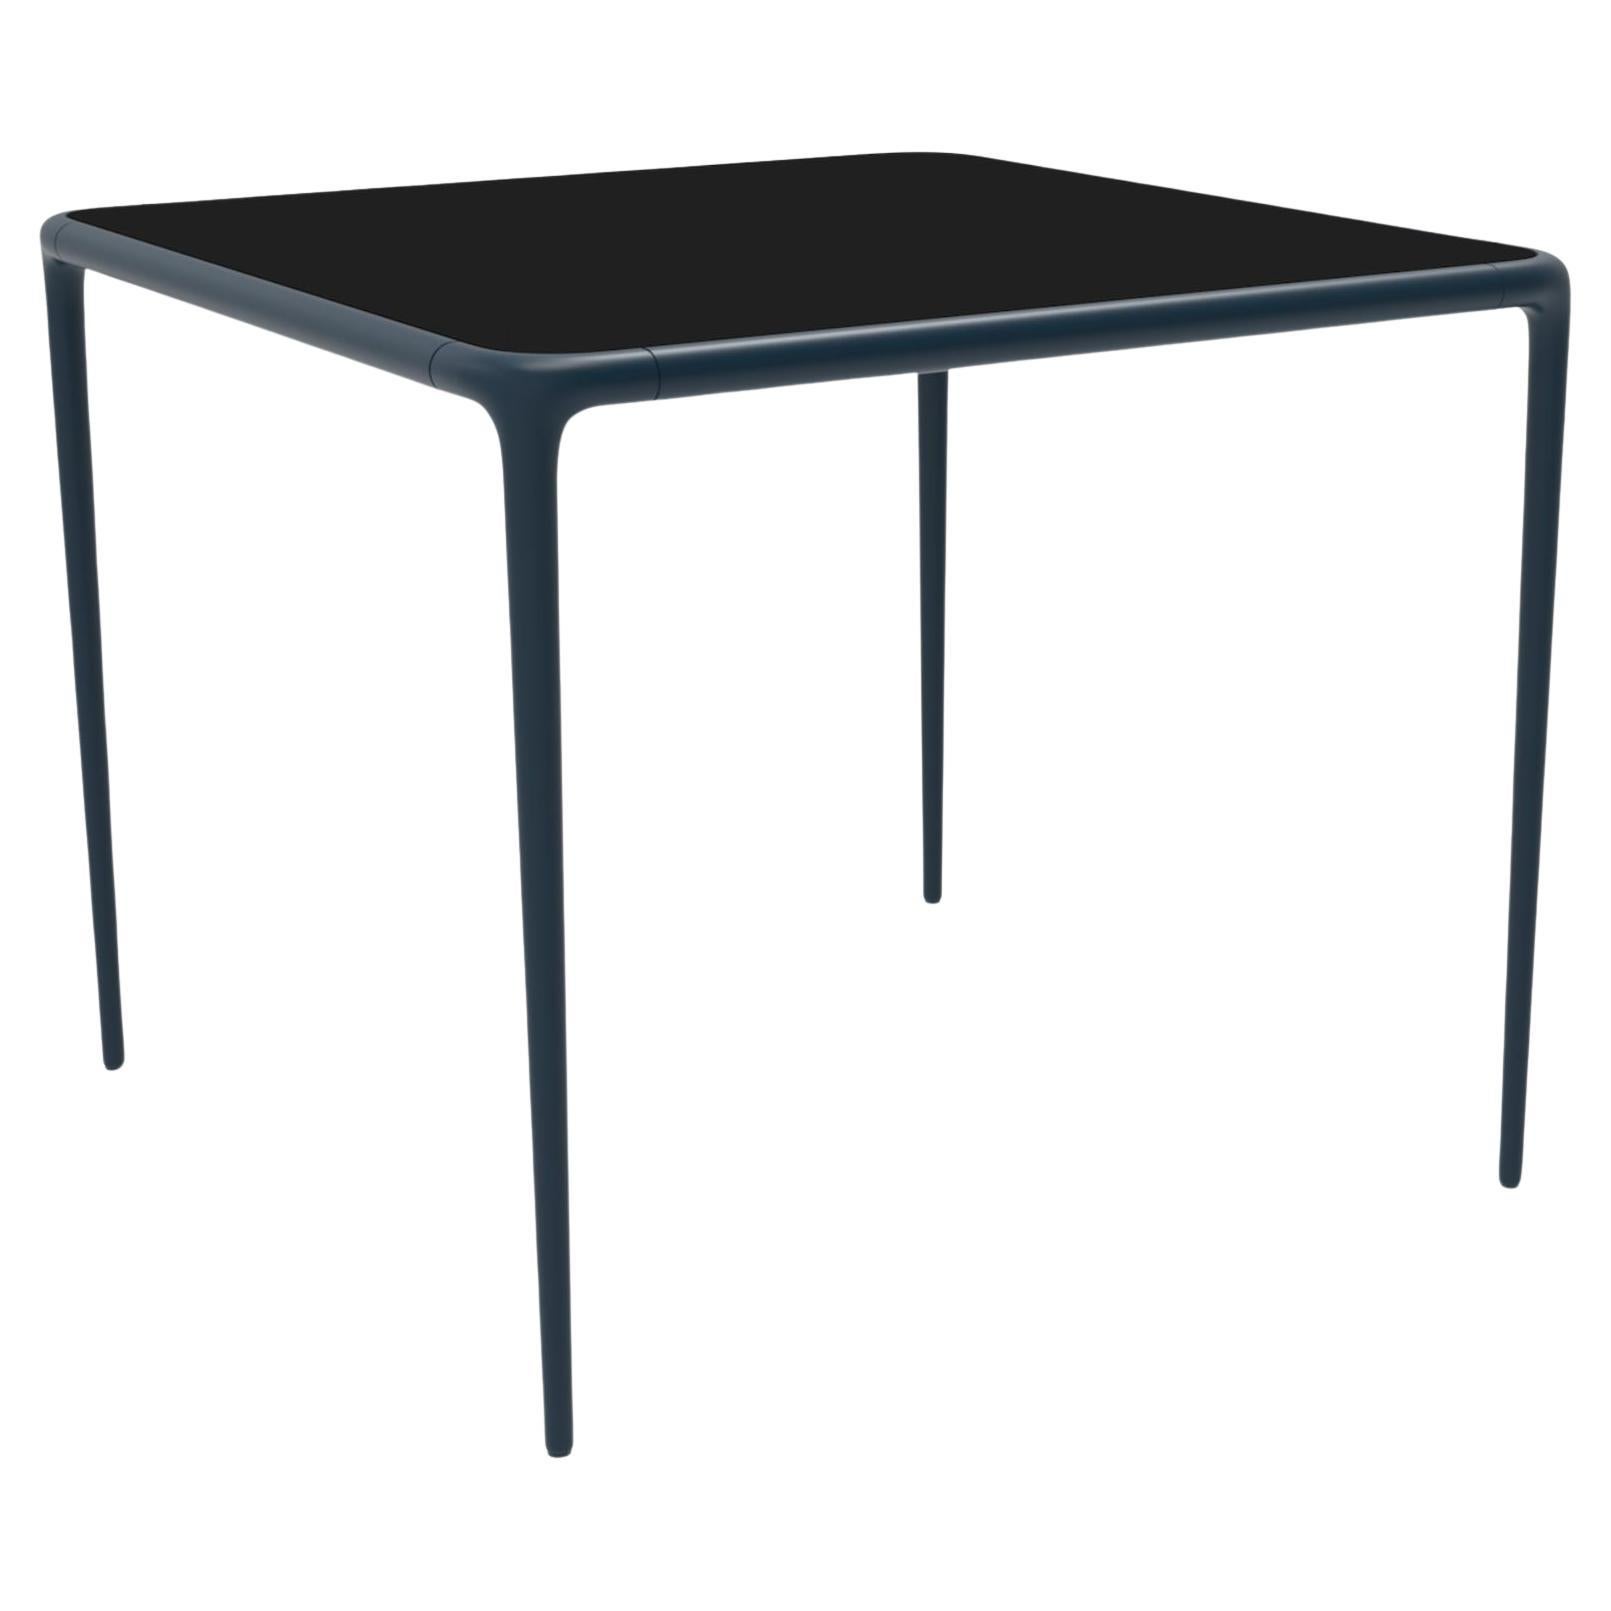 Xaloc Navy Glass Top Table 90 by Mowee